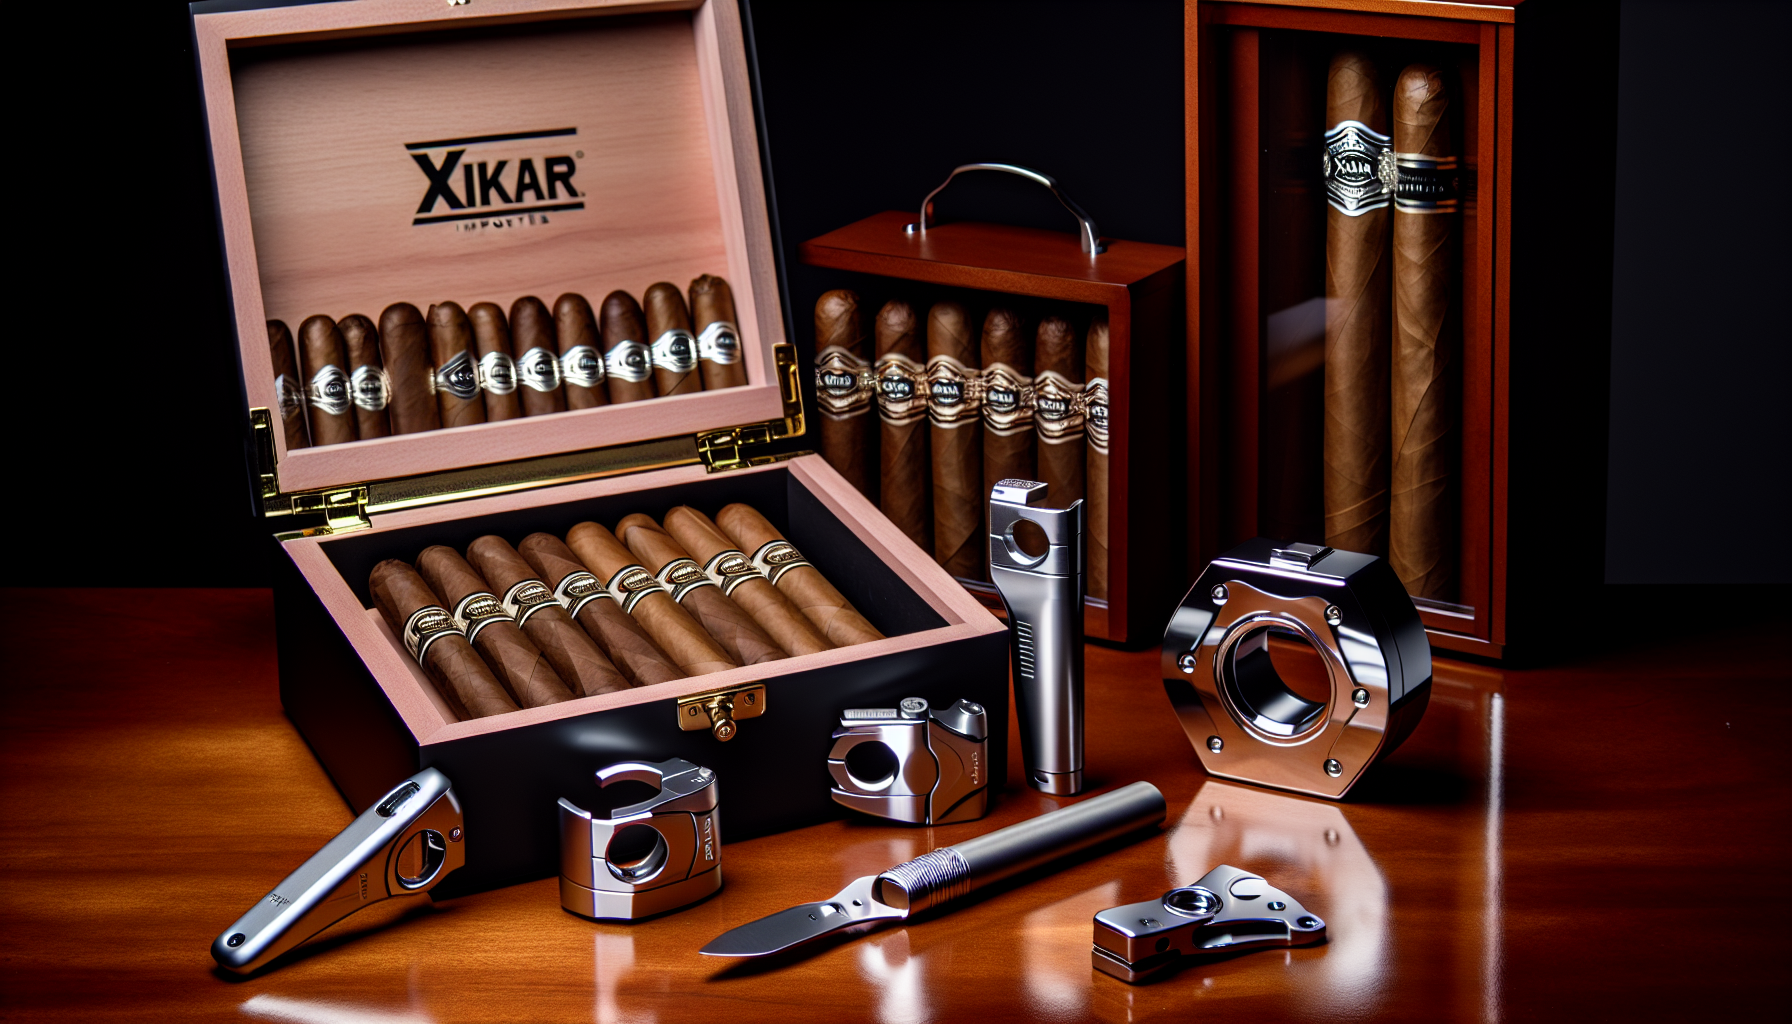 A selection of Xikar cigar accessories for enhancing the cigar experience